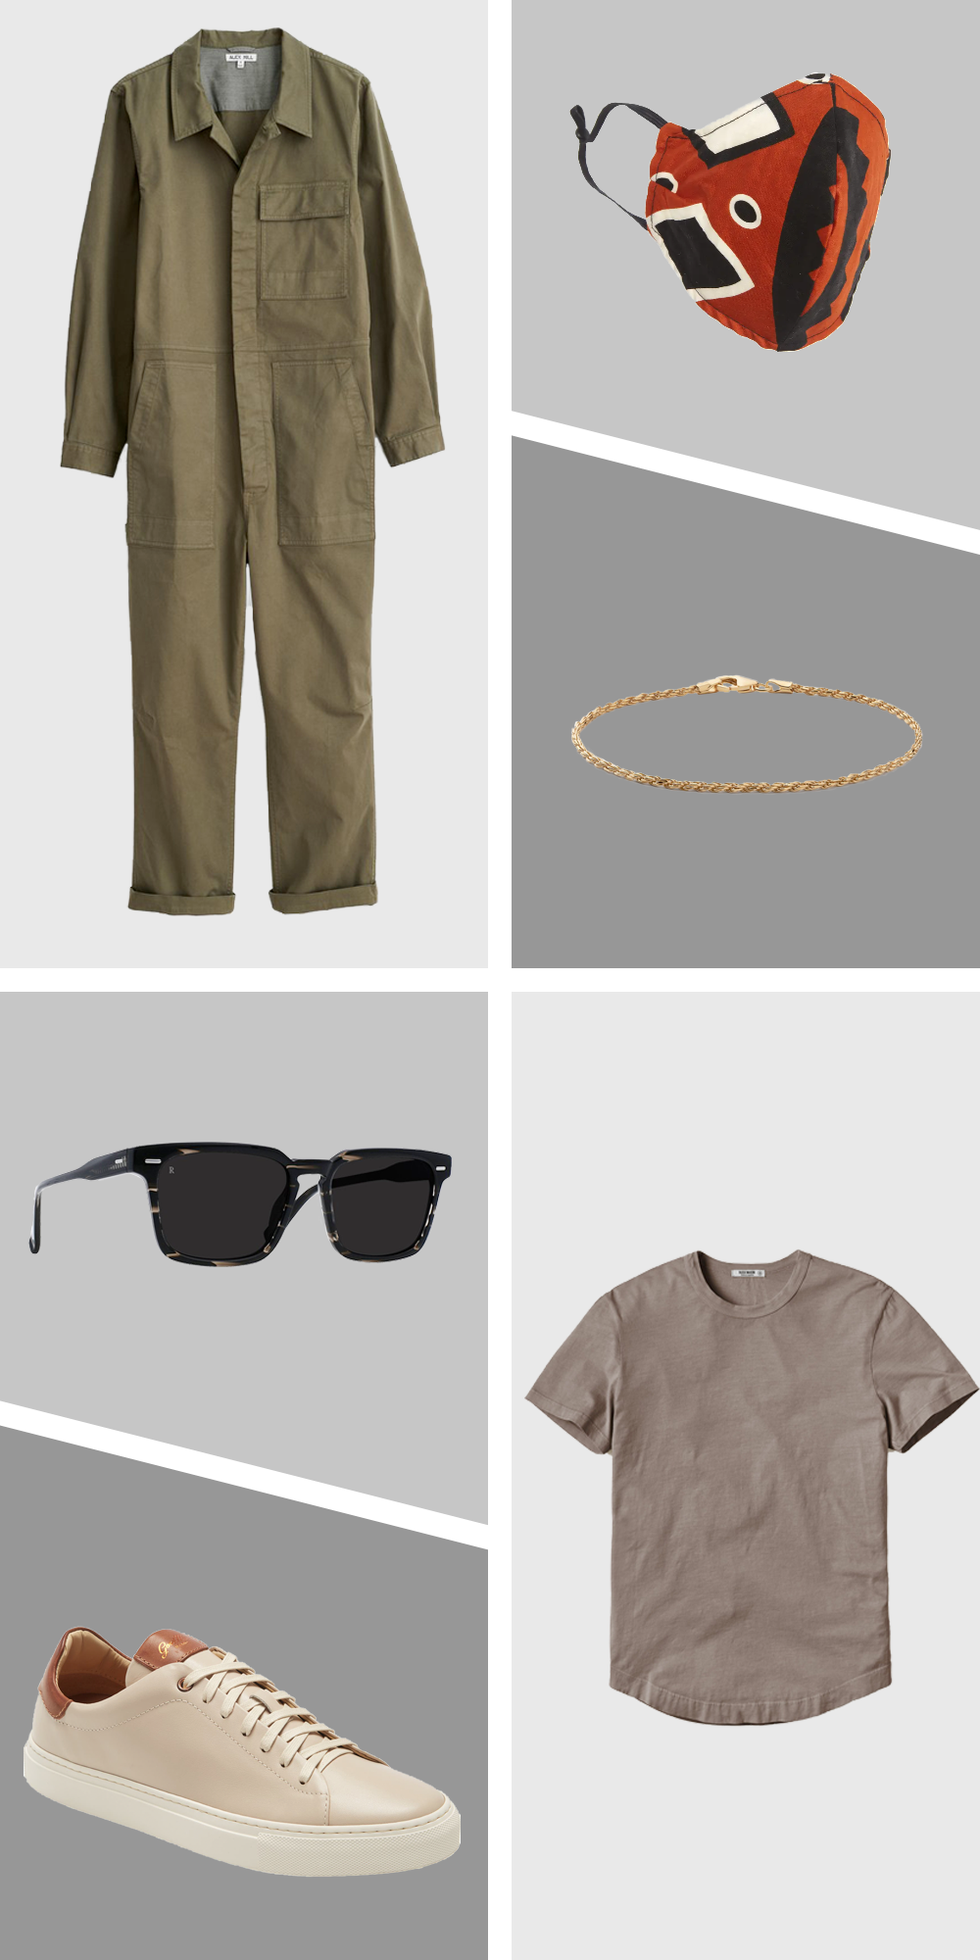 spring outfits for men